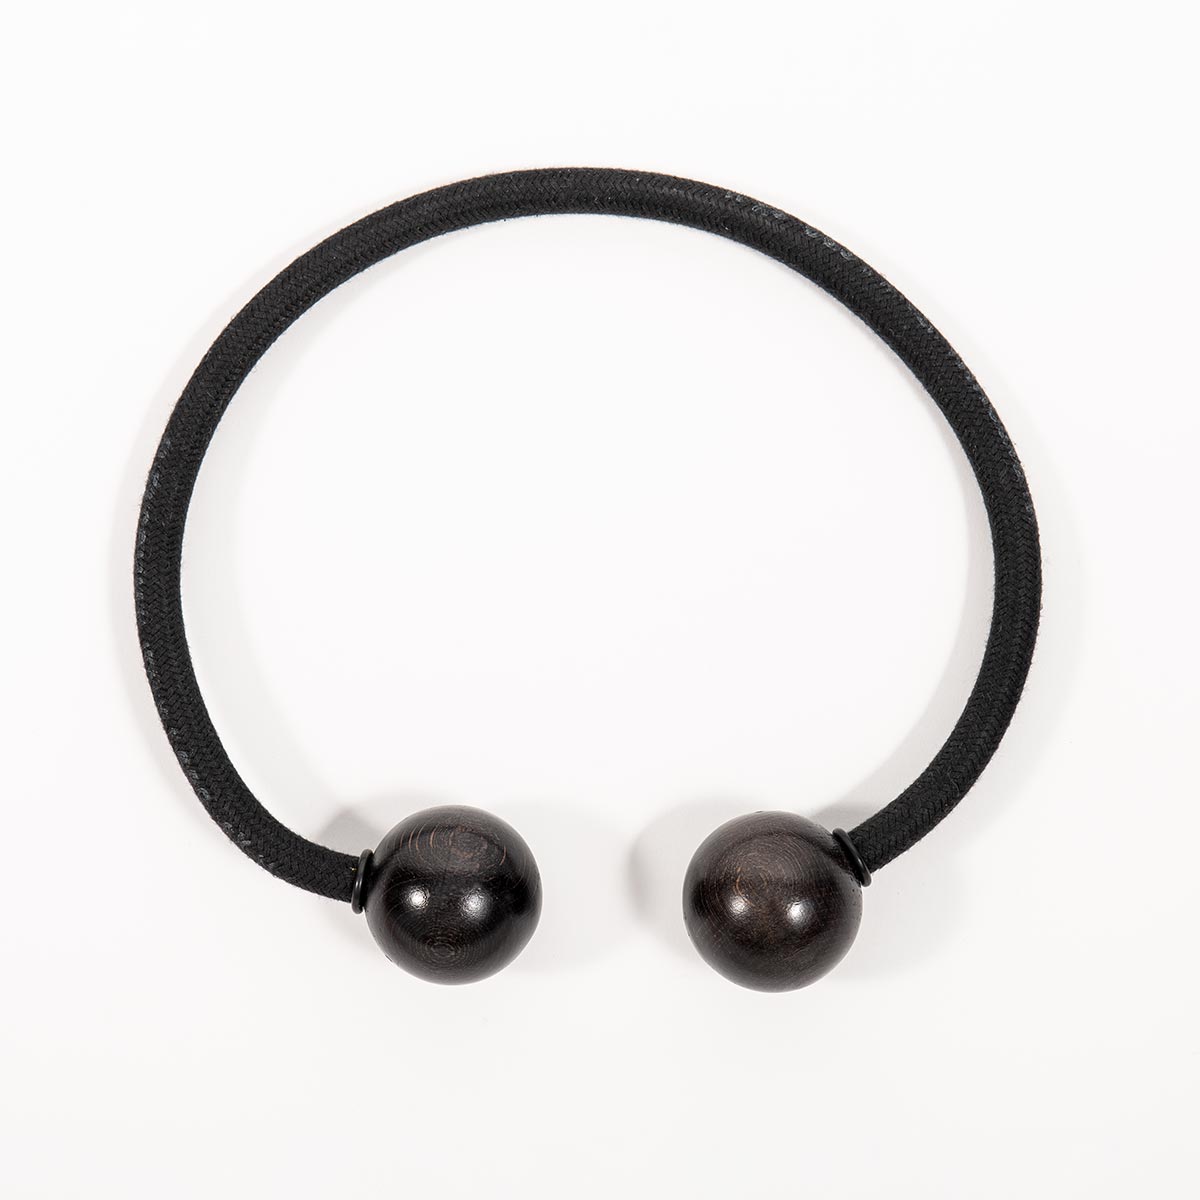 Necklace with Wood Balls - Black